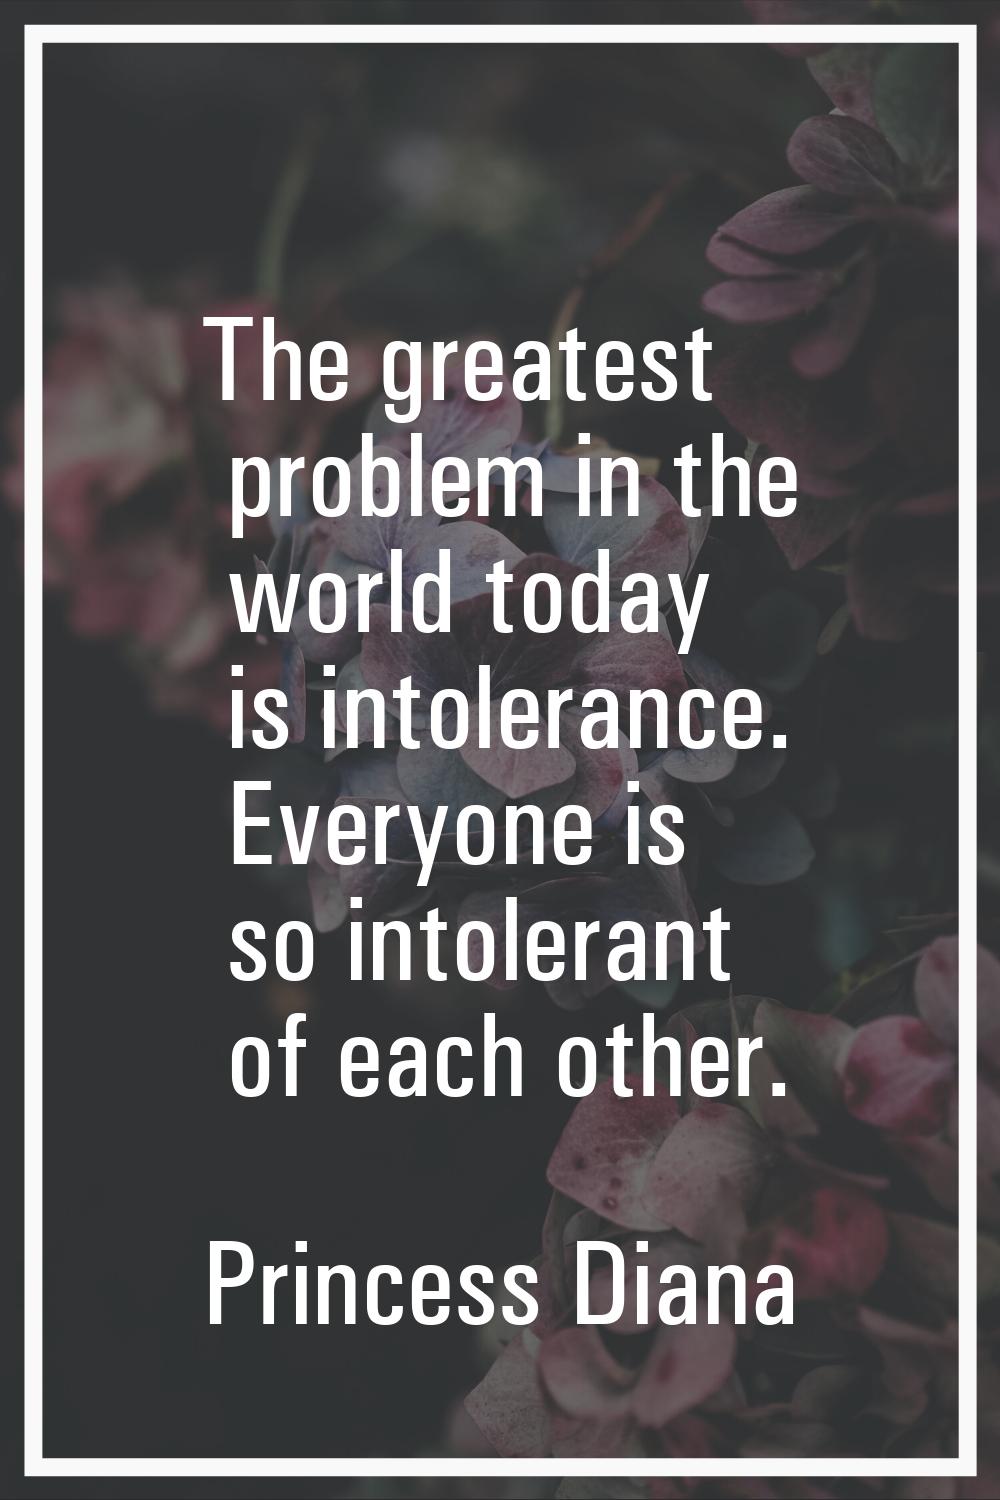 The greatest problem in the world today is intolerance. Everyone is so intolerant of each other.